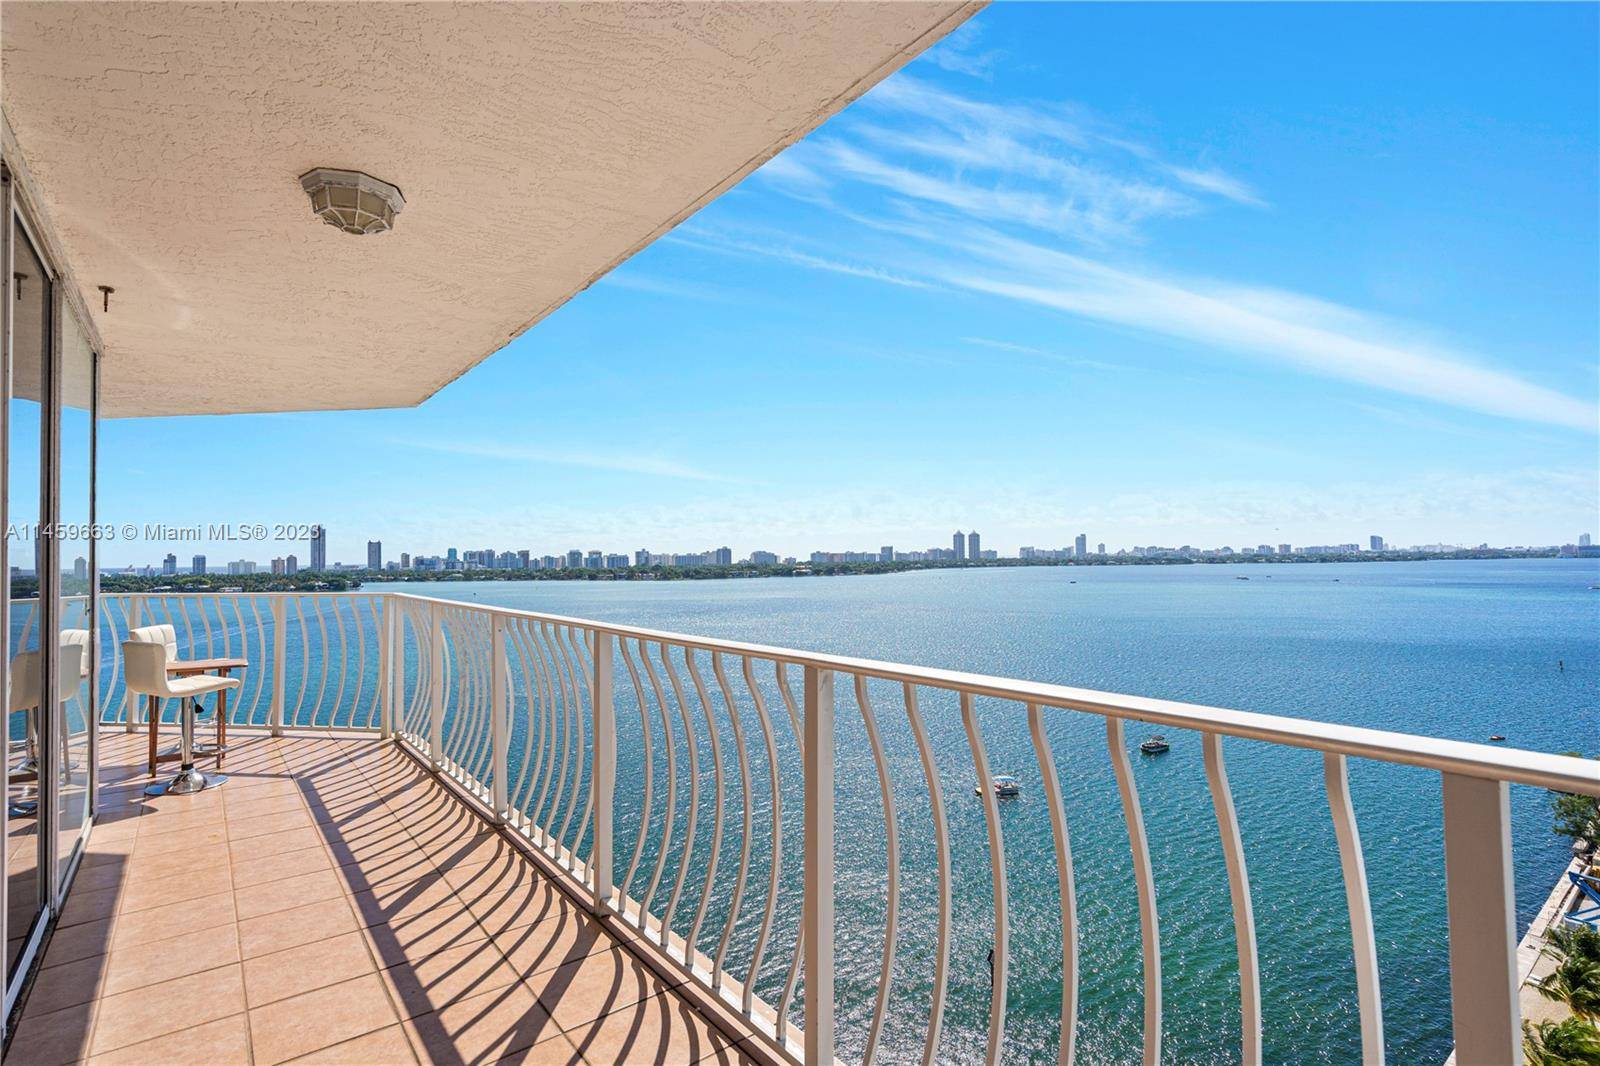 Stunning south facing bay views across the Miami and Miami Beach skylines for unforgettable sunsets.